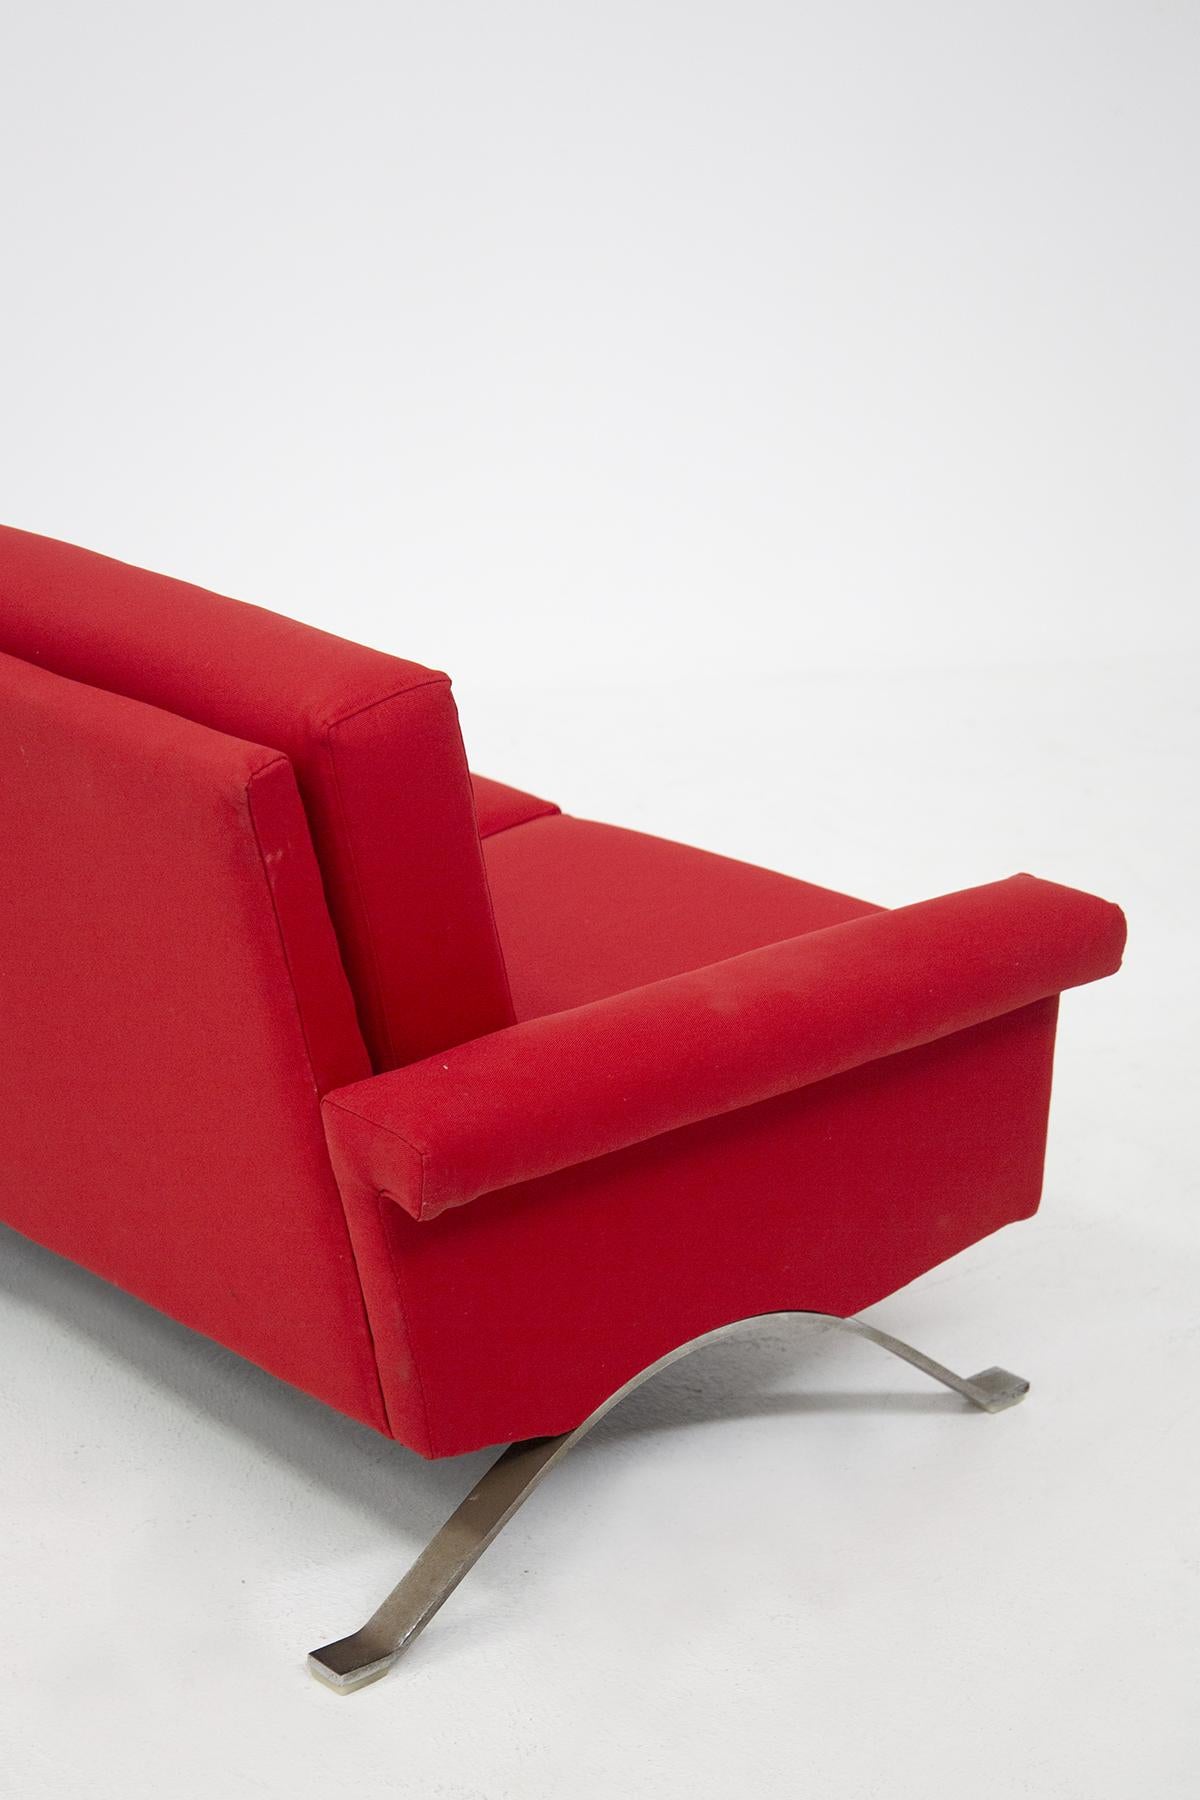 Rare Italian Red Sofa by Ico Parisi for Cassina Mod. 875, Published For Sale 4